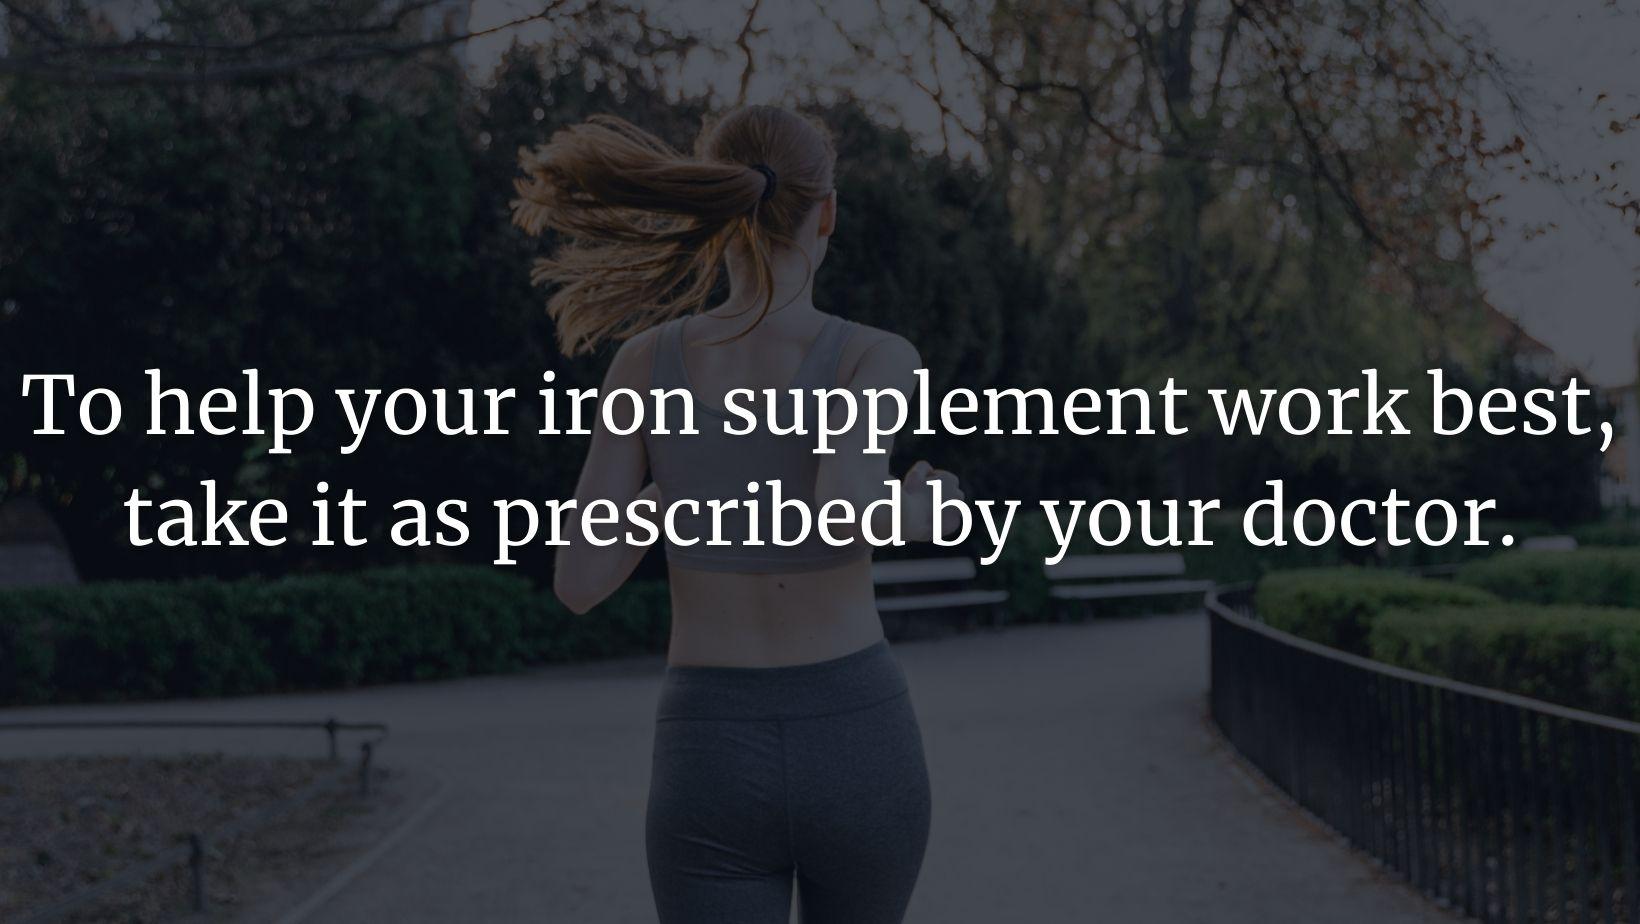 To help your iron supplement work best, take it as prescribed by a doctor.